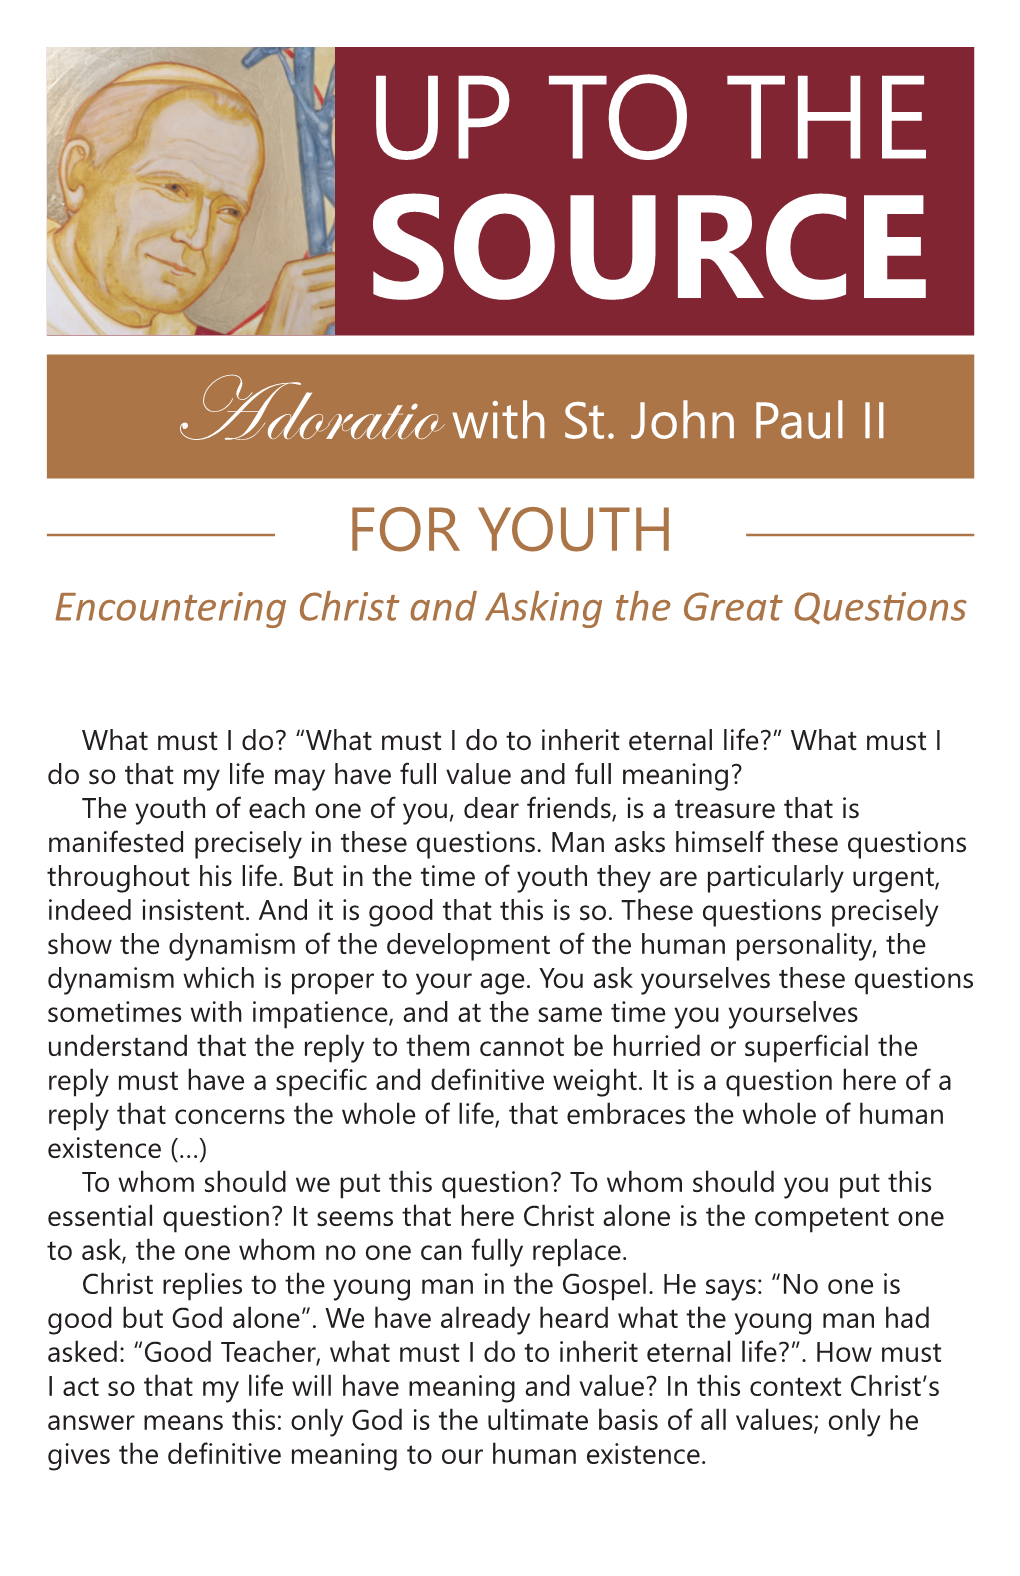 Encountering Christ and Asking the Great Questions